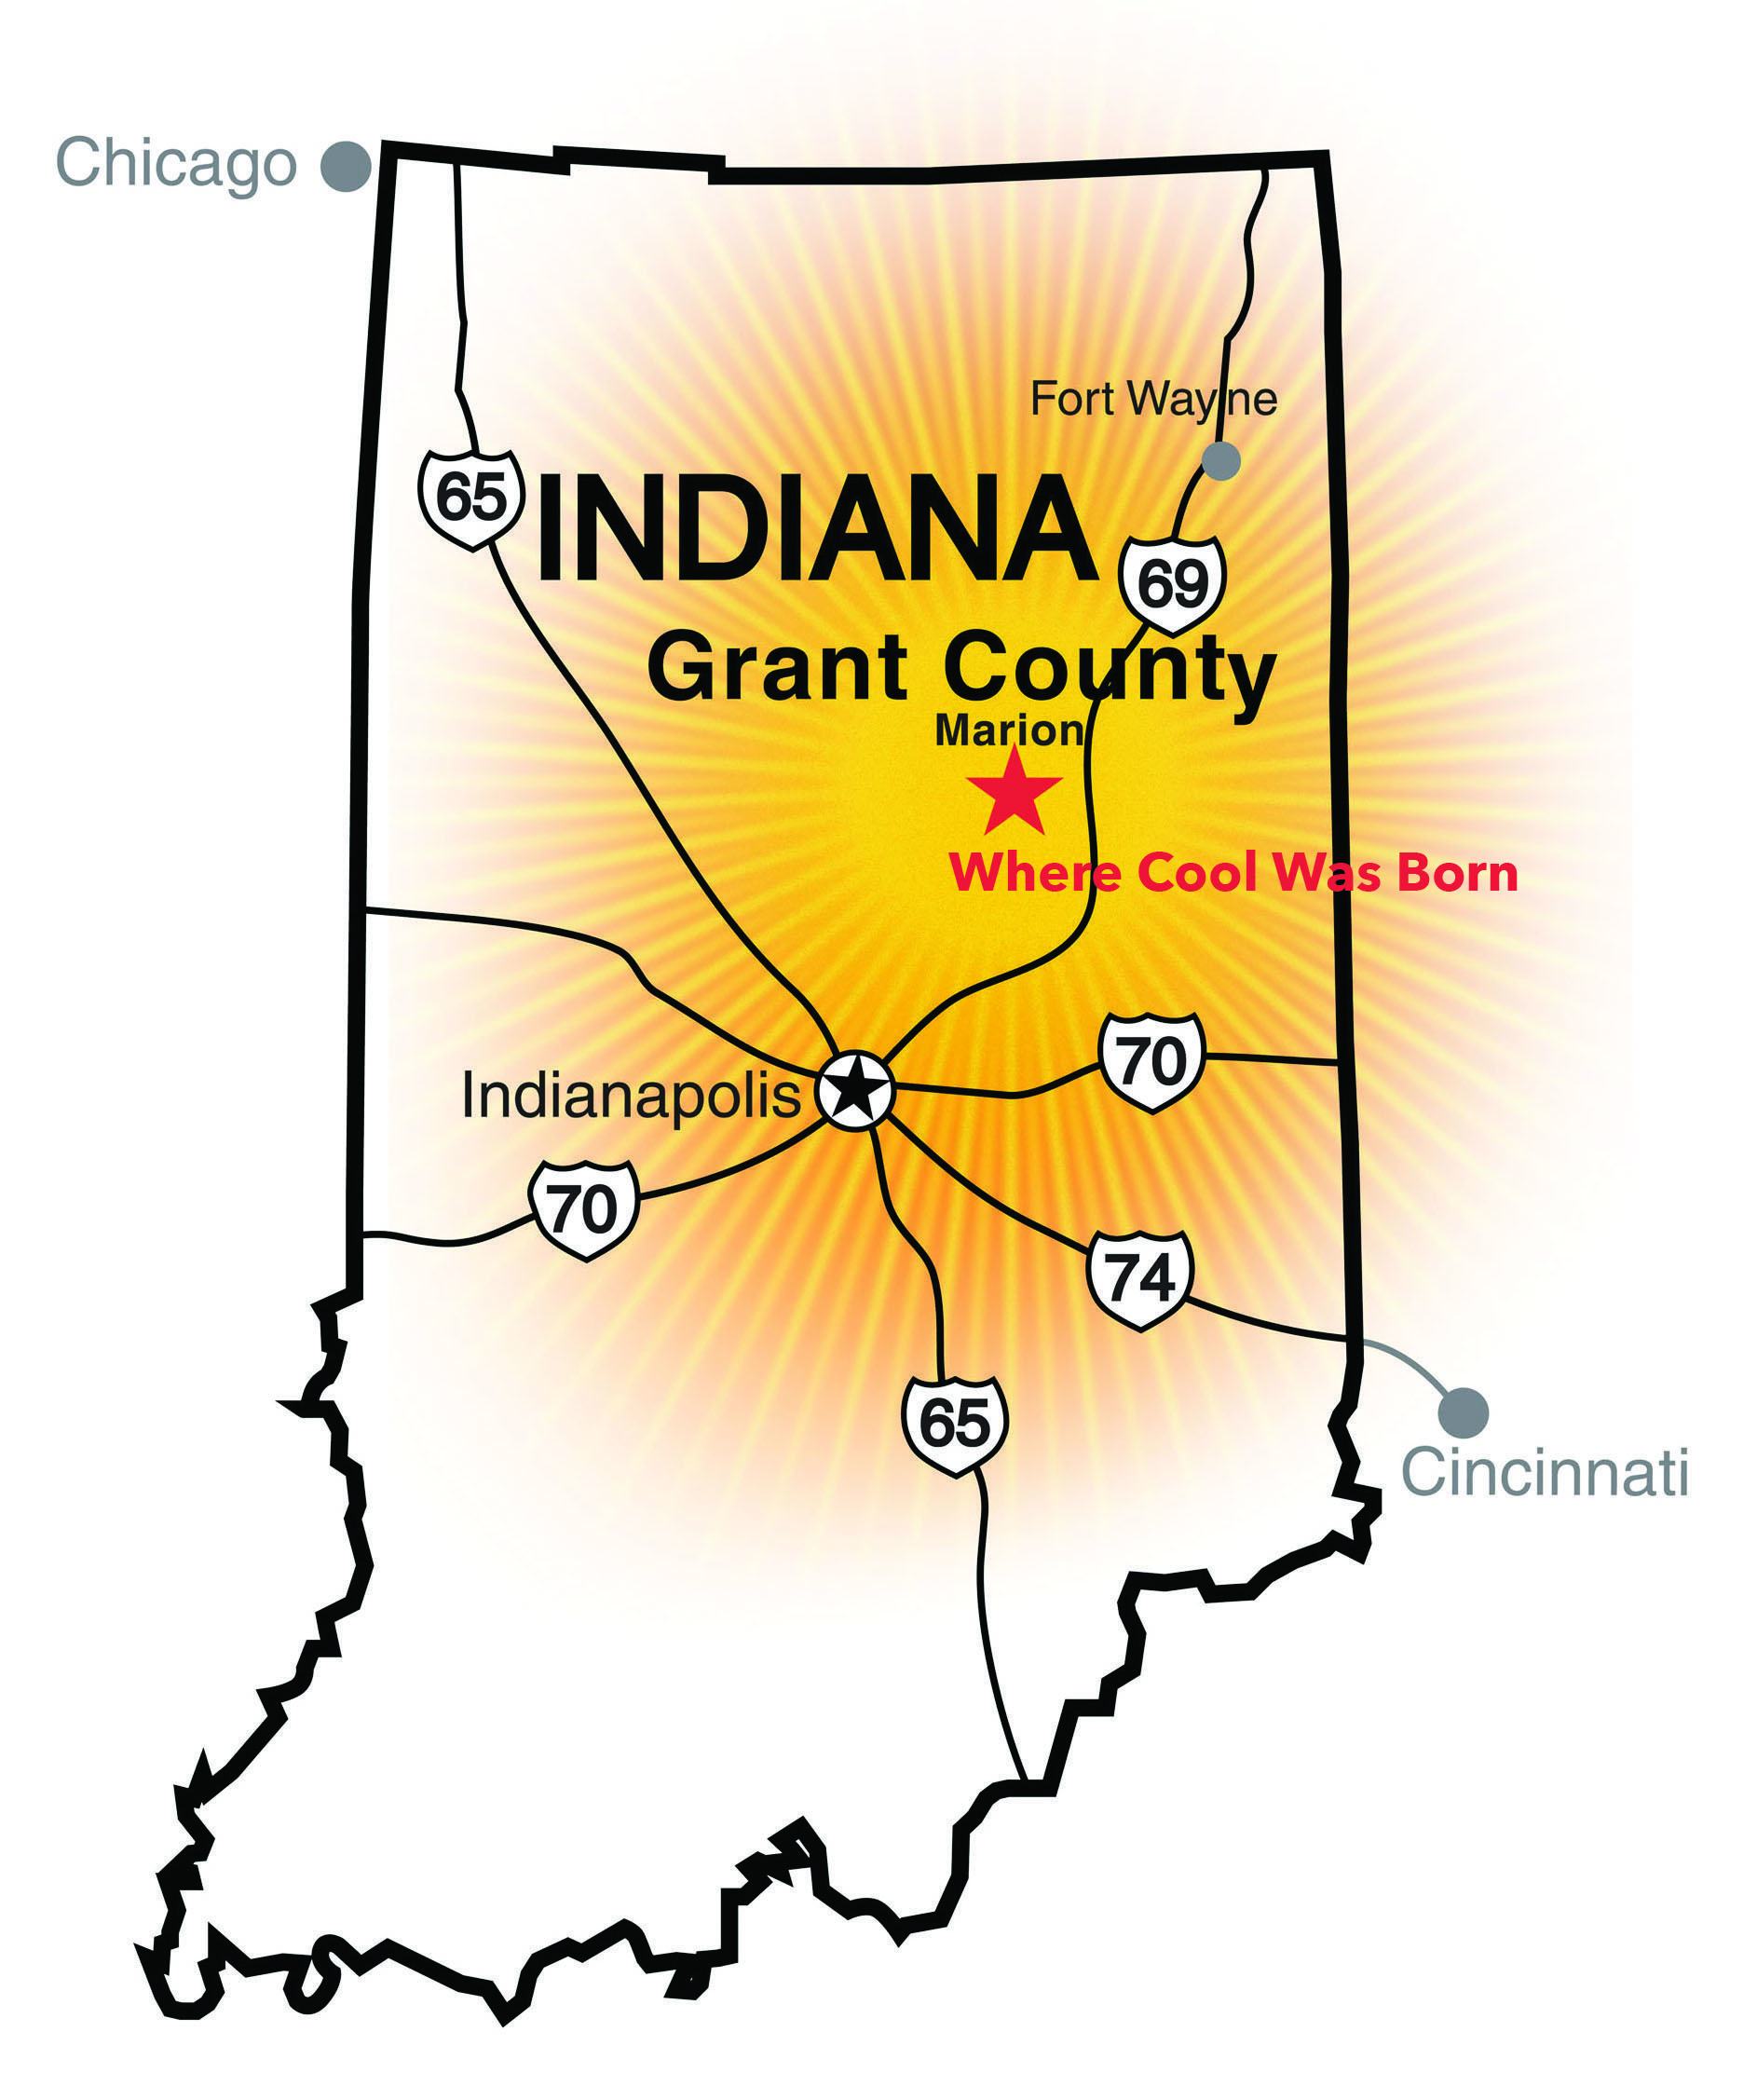 converse indiana map,Quality assurance 